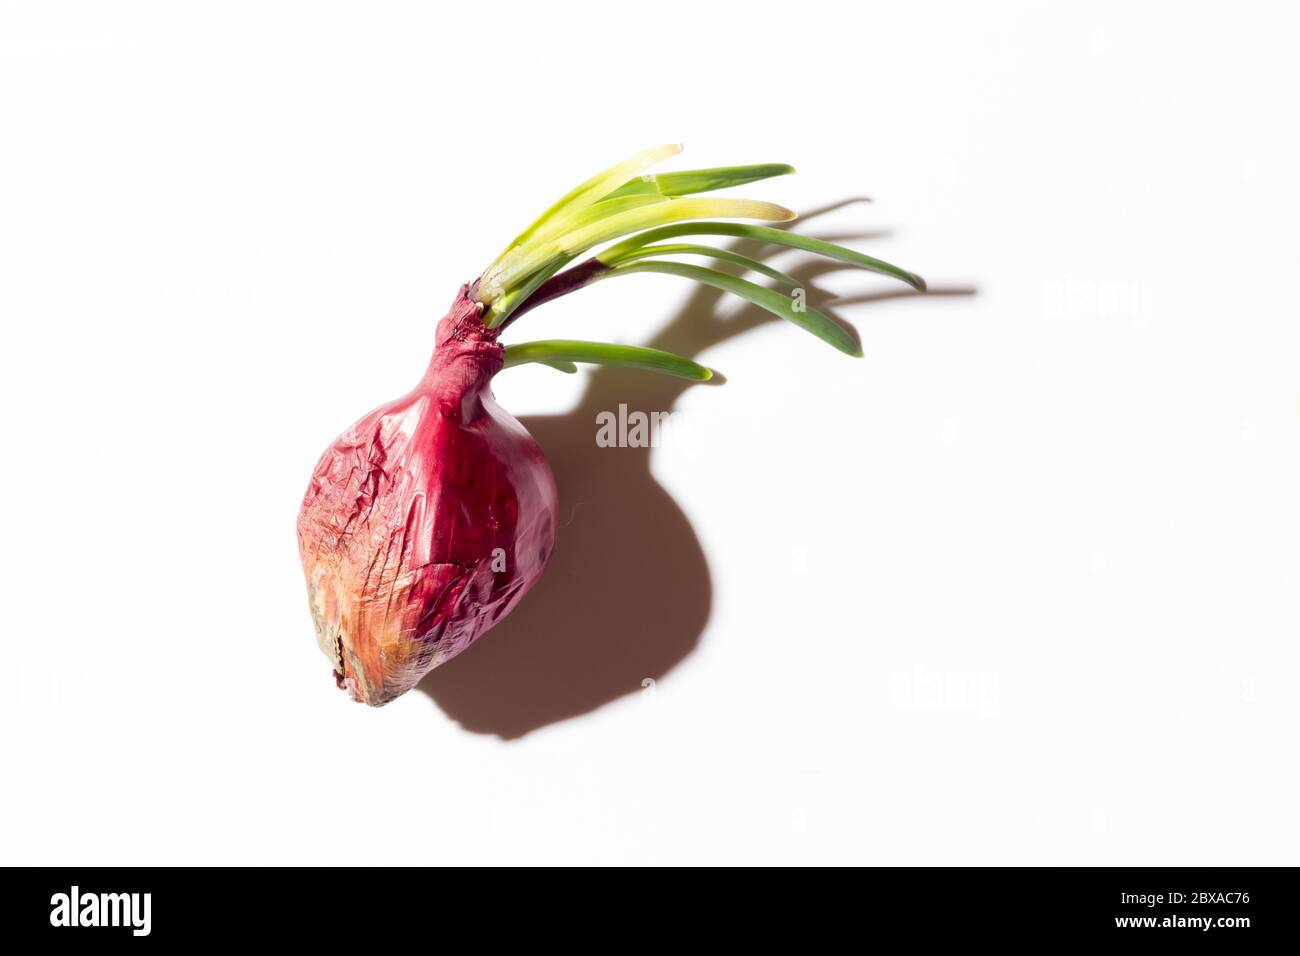 Ugly red onion with green sprouts on a white background with a hard shadow. Stock Photo